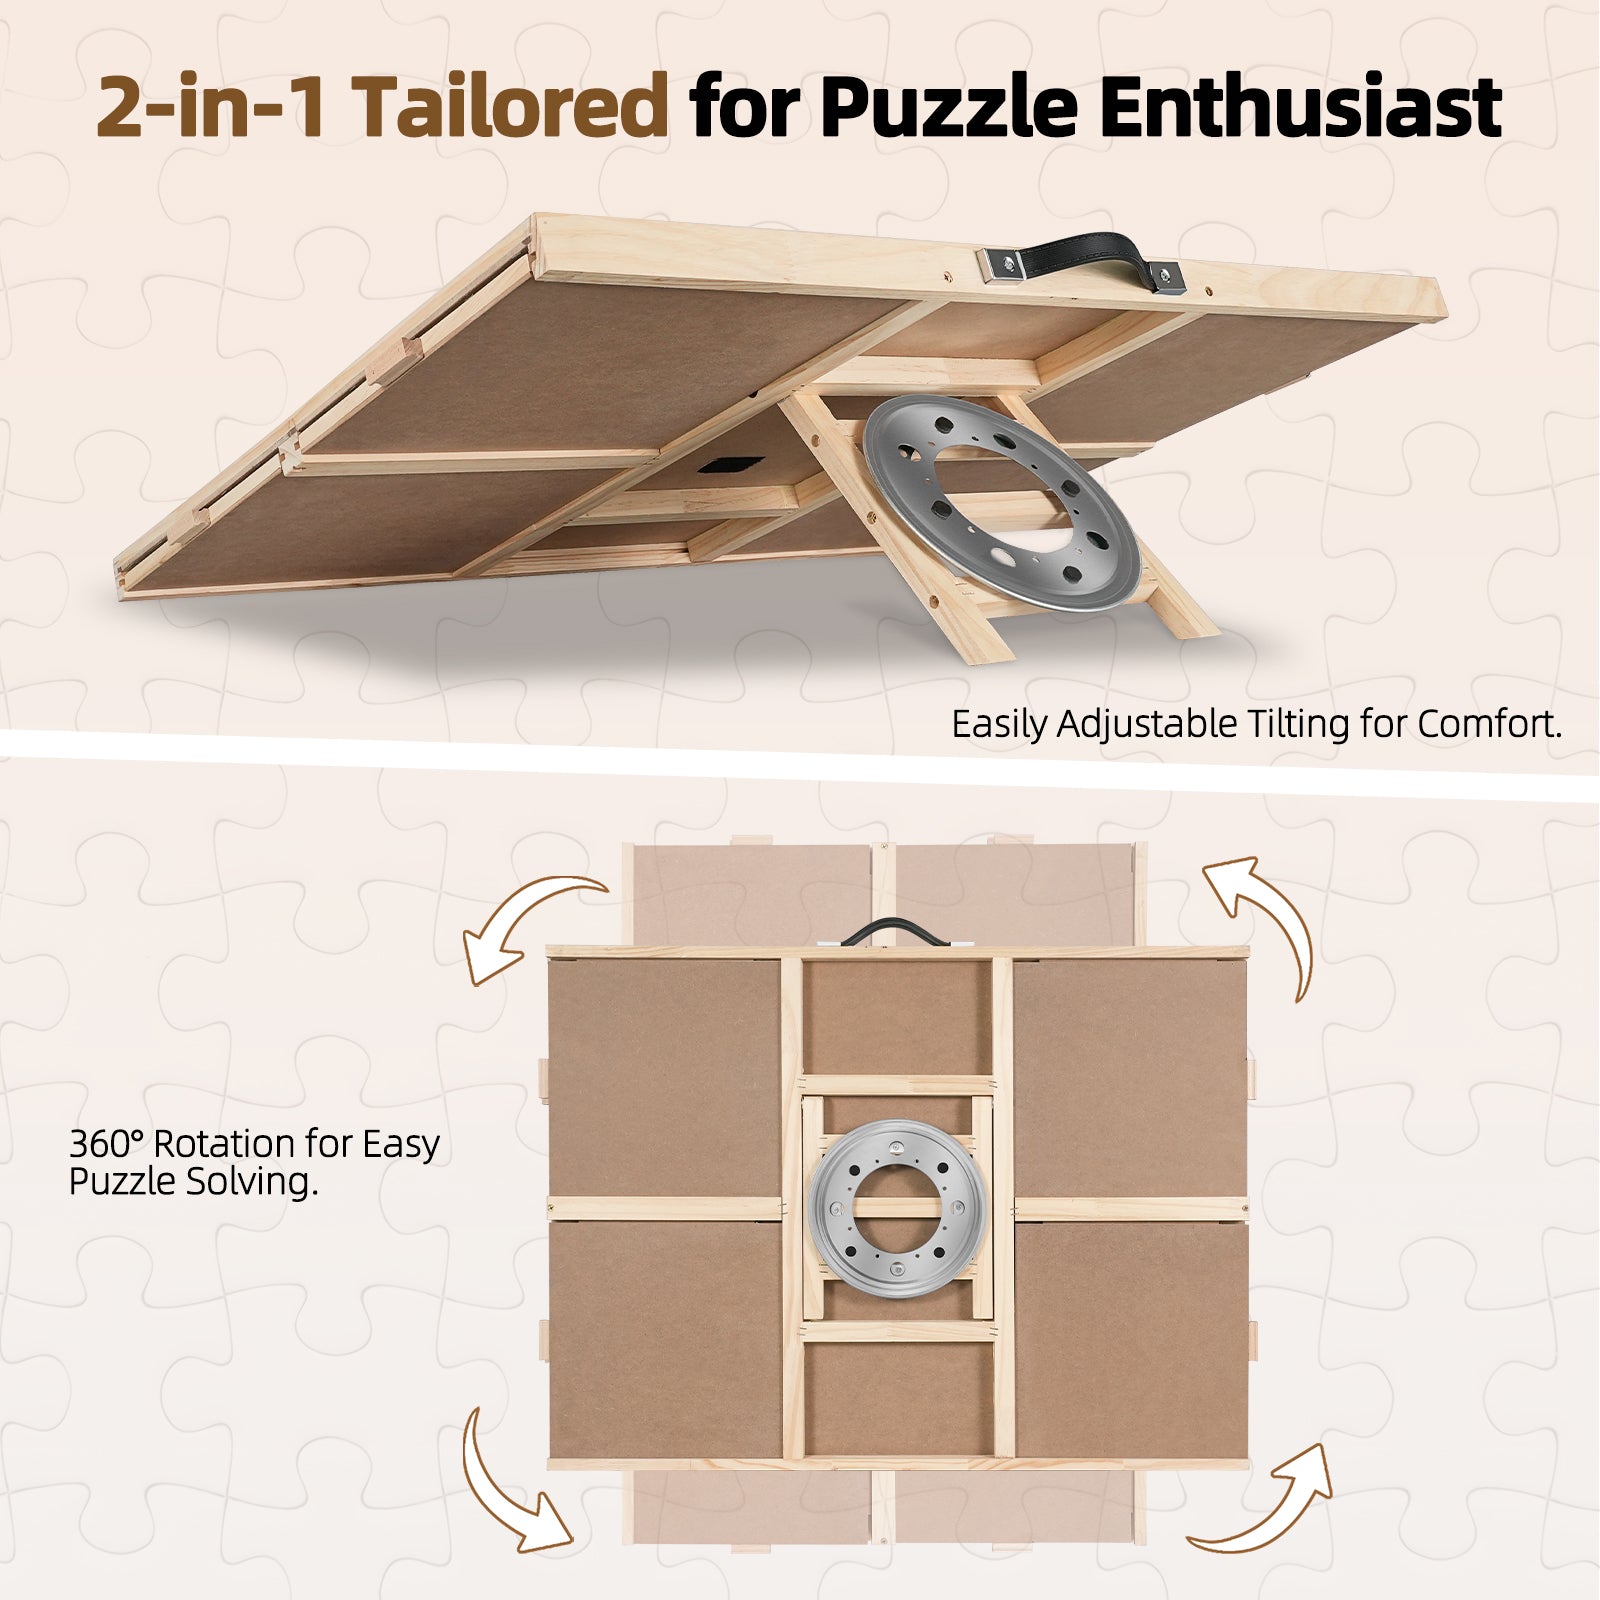 ALL4JIG 2-in-1 Tilting & Rotating Puzzle Board for Adults Gifts, Wooden Jigsaw Puzzle Table with 4 Drawers, Portable Puzzle Table with Lazy Susan and Cover, 26.4